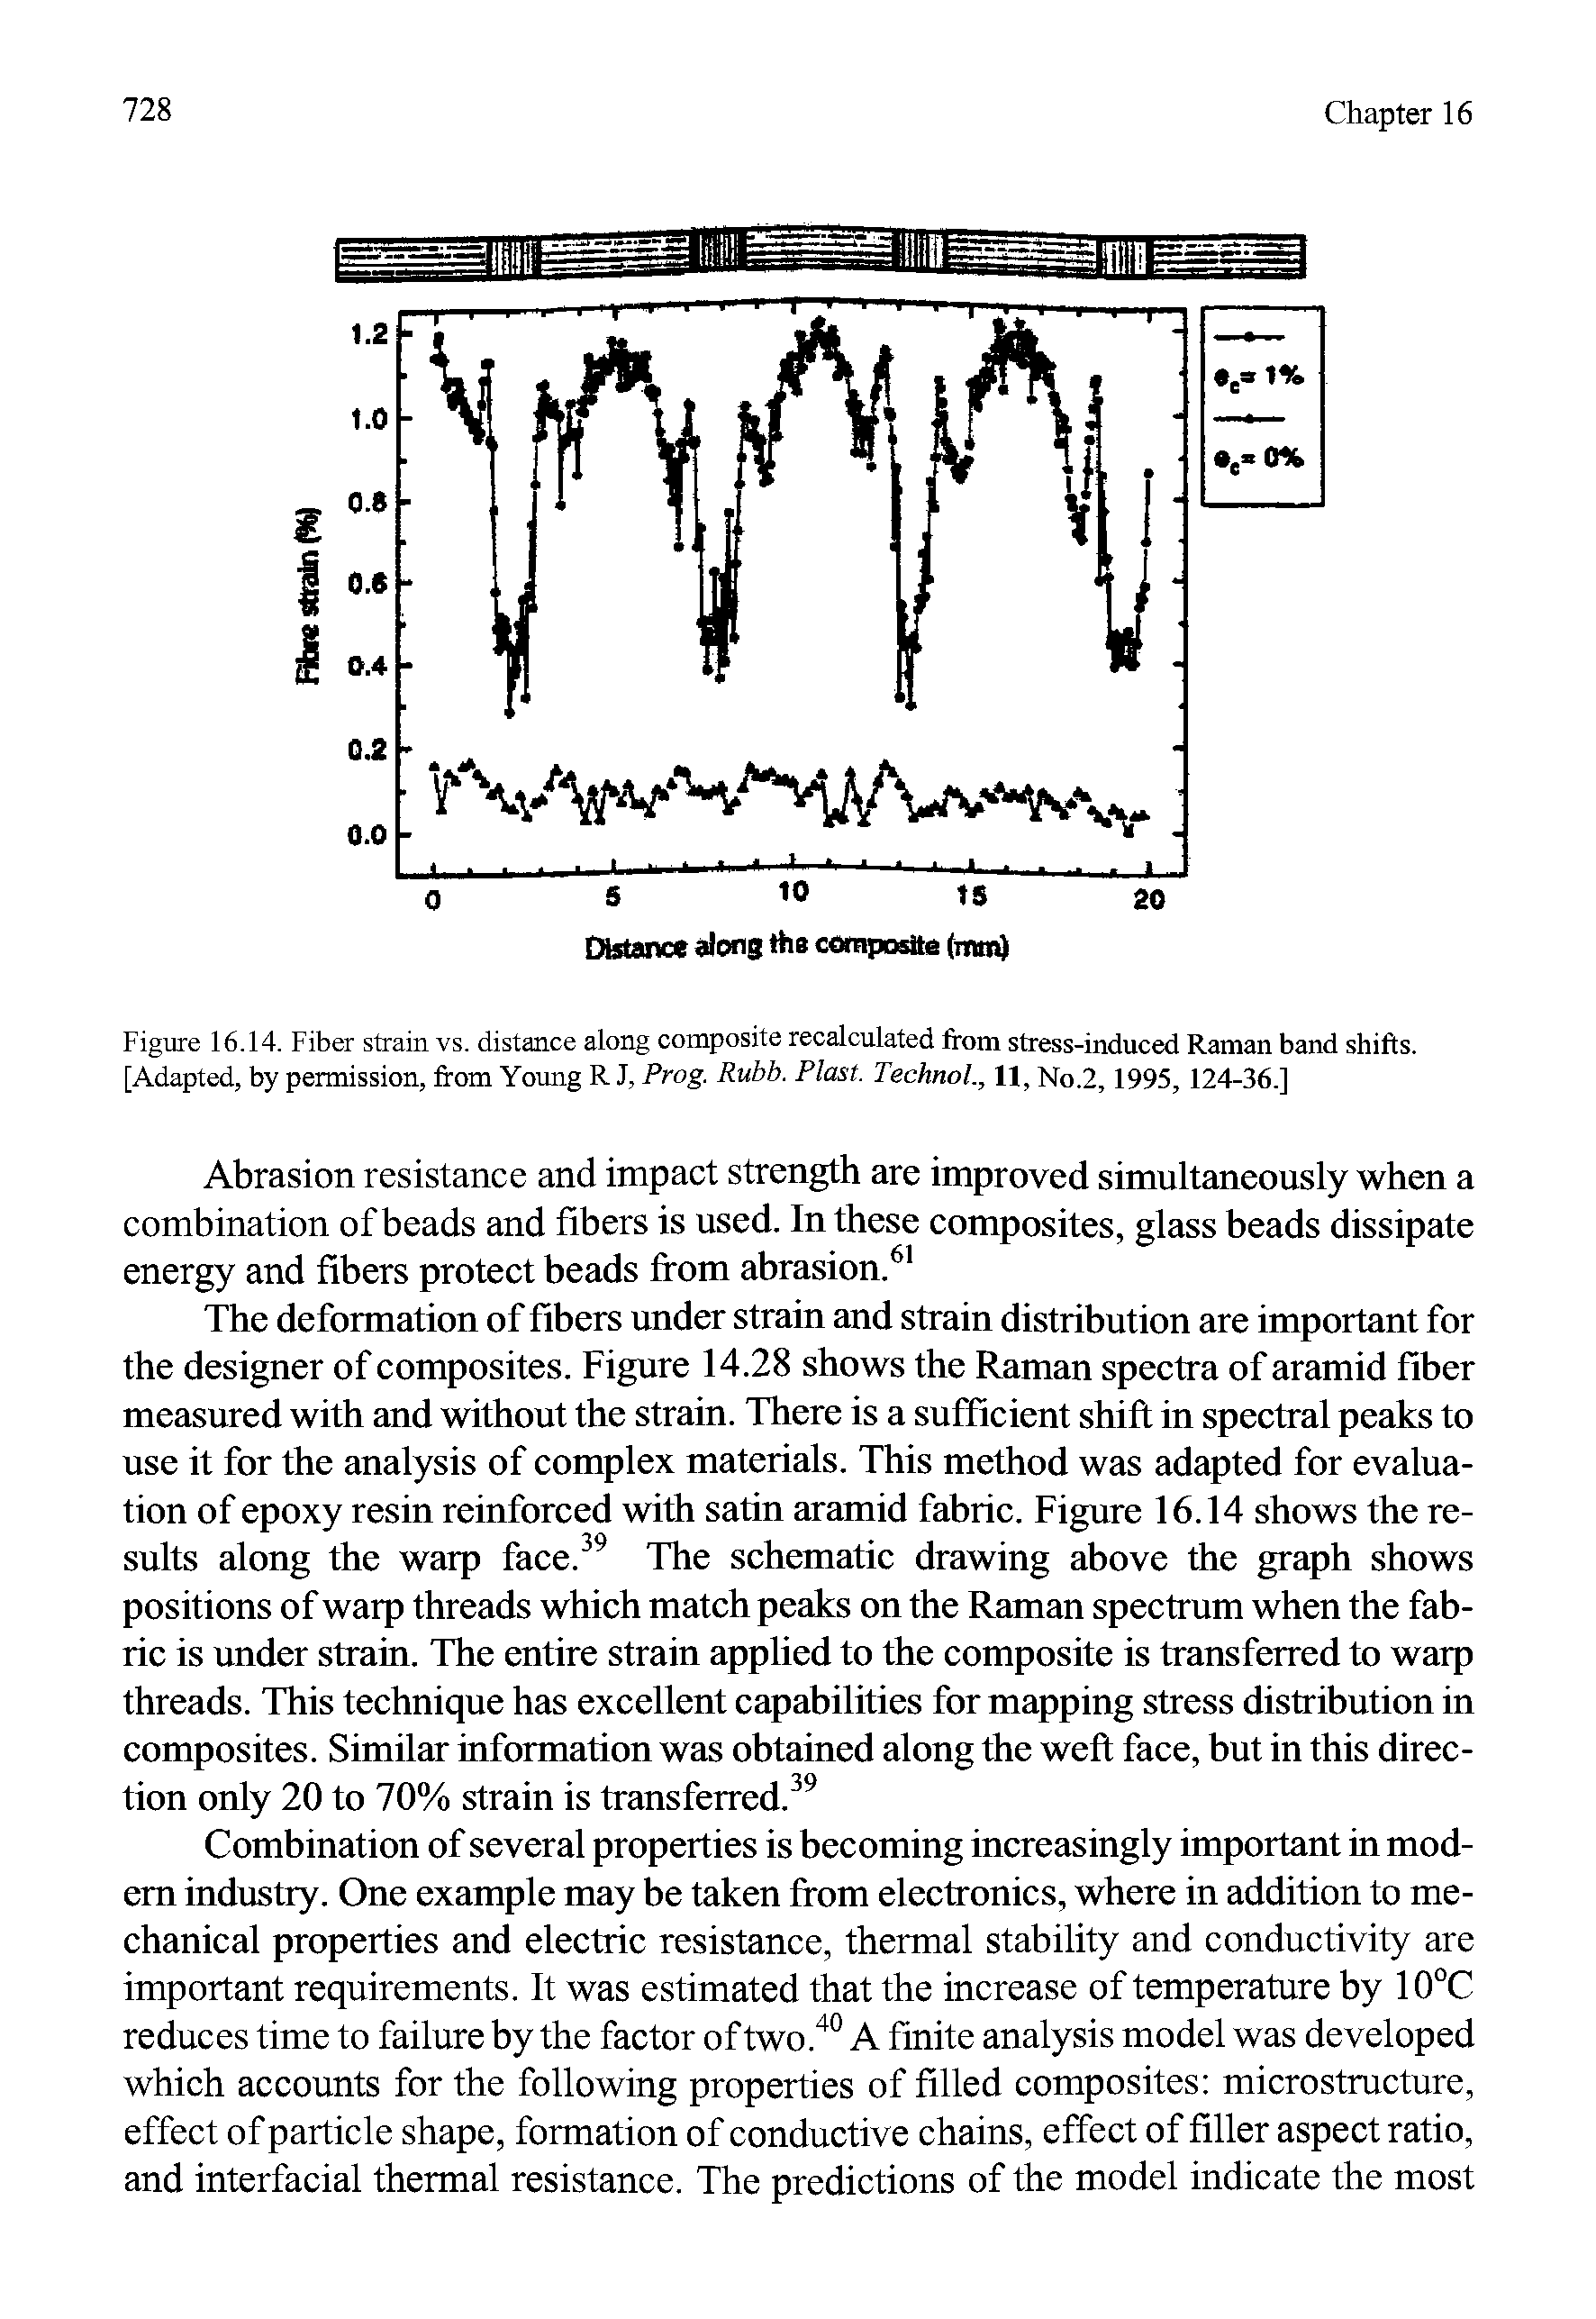 Figure 16.14. Fiber strain vs. distance along composite recalculated from stress-induced Raman band shifts. [Adapted, by permission, from Young R J, Prog. Rubb. Plast. Technol., H, No.2,1995, 124-36.]...